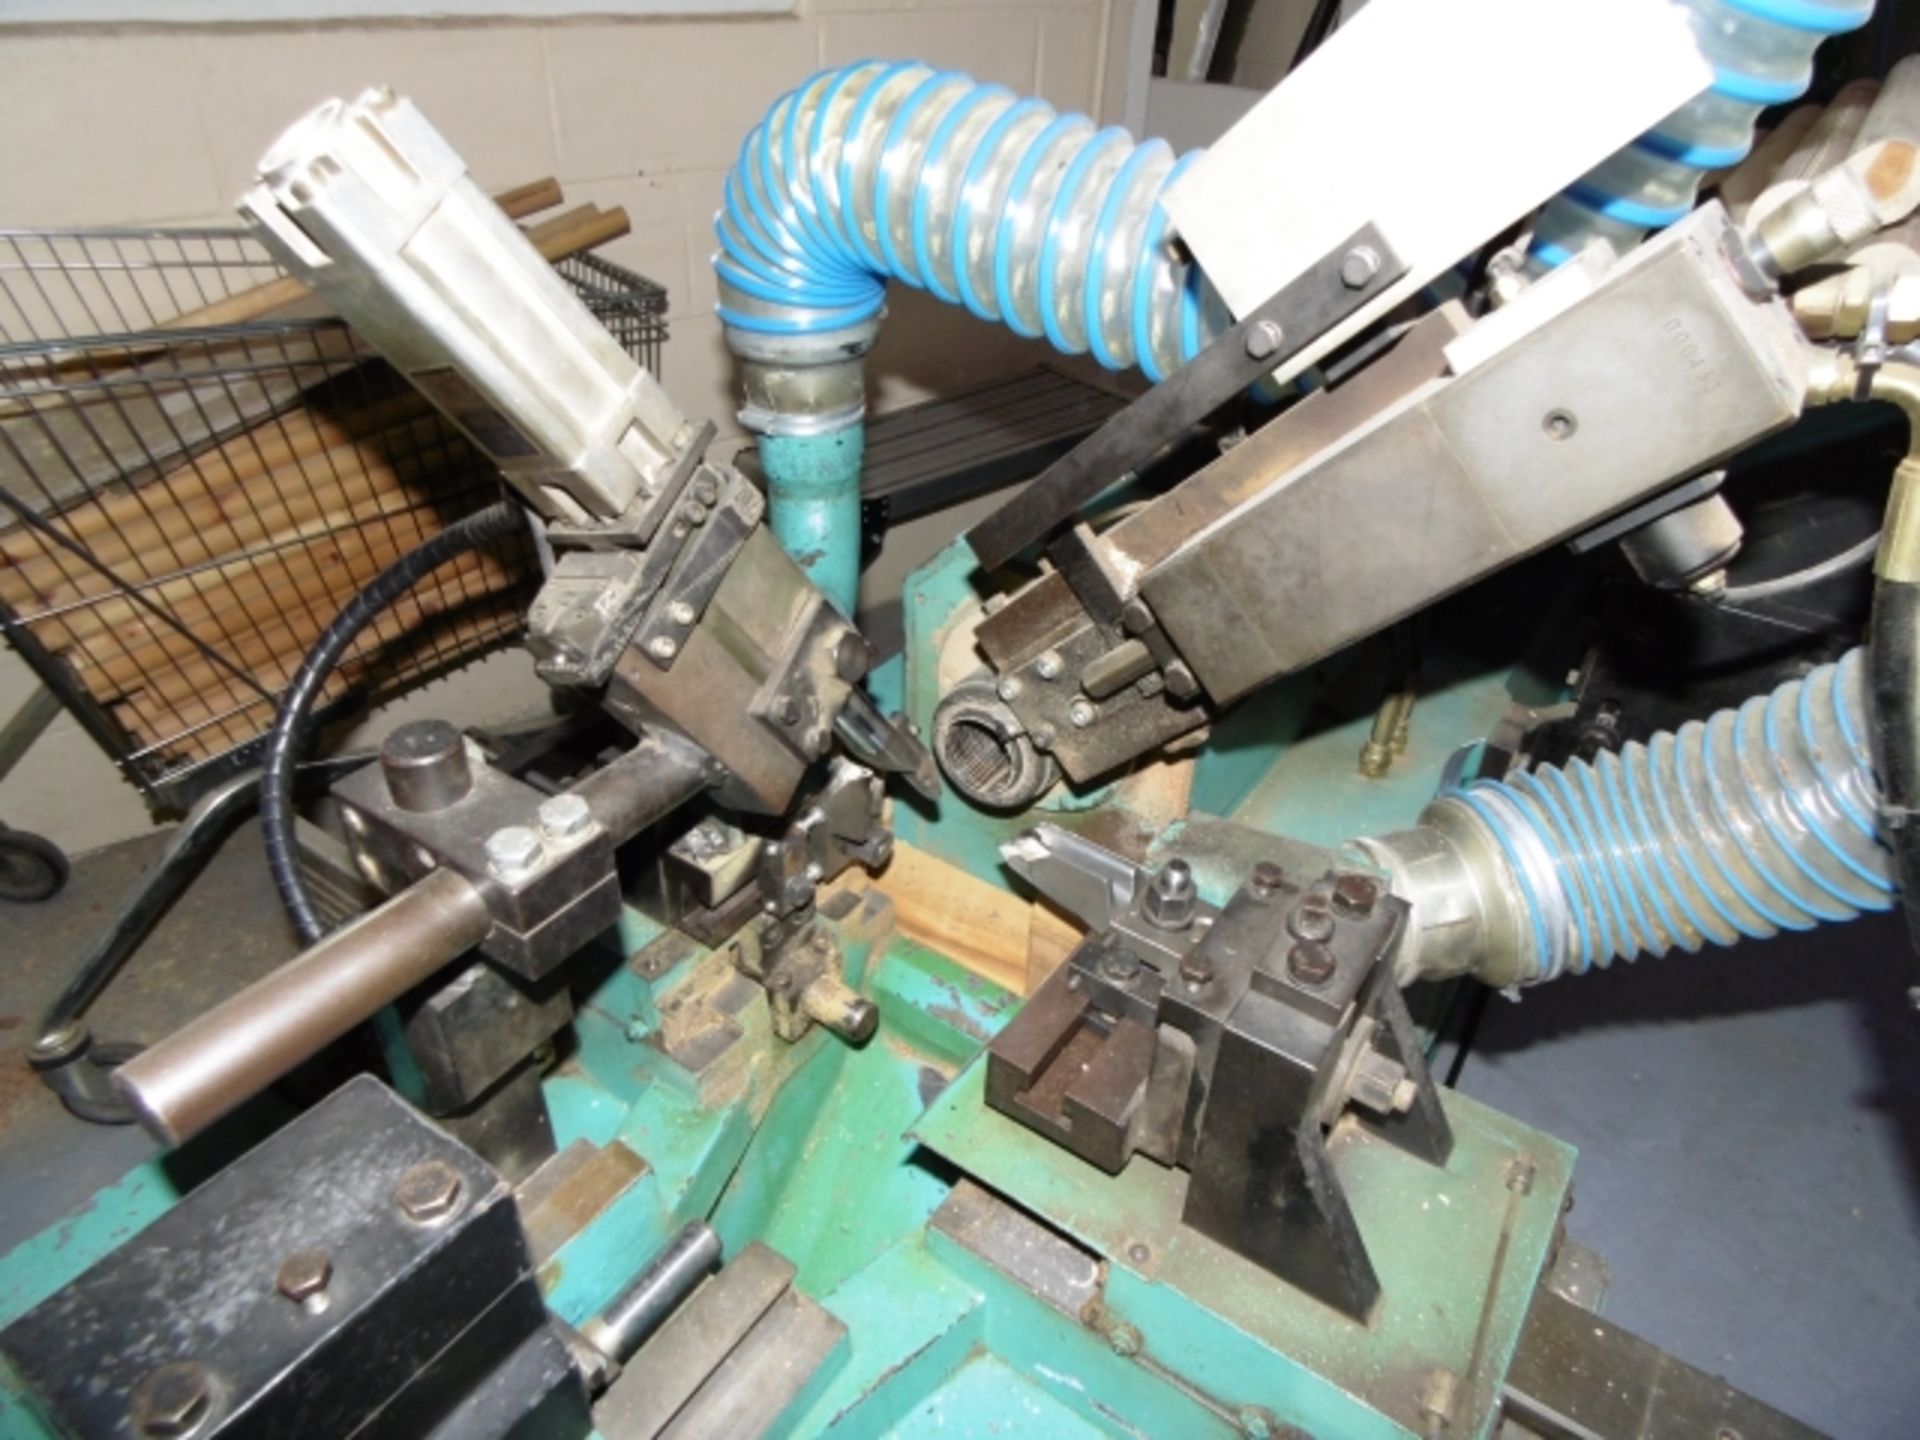 * 1997 Intorex TRV-45 Automatic Wood Turning Lathe. Serial No 201278. 2 knives, frontal tool and a - Image 5 of 11